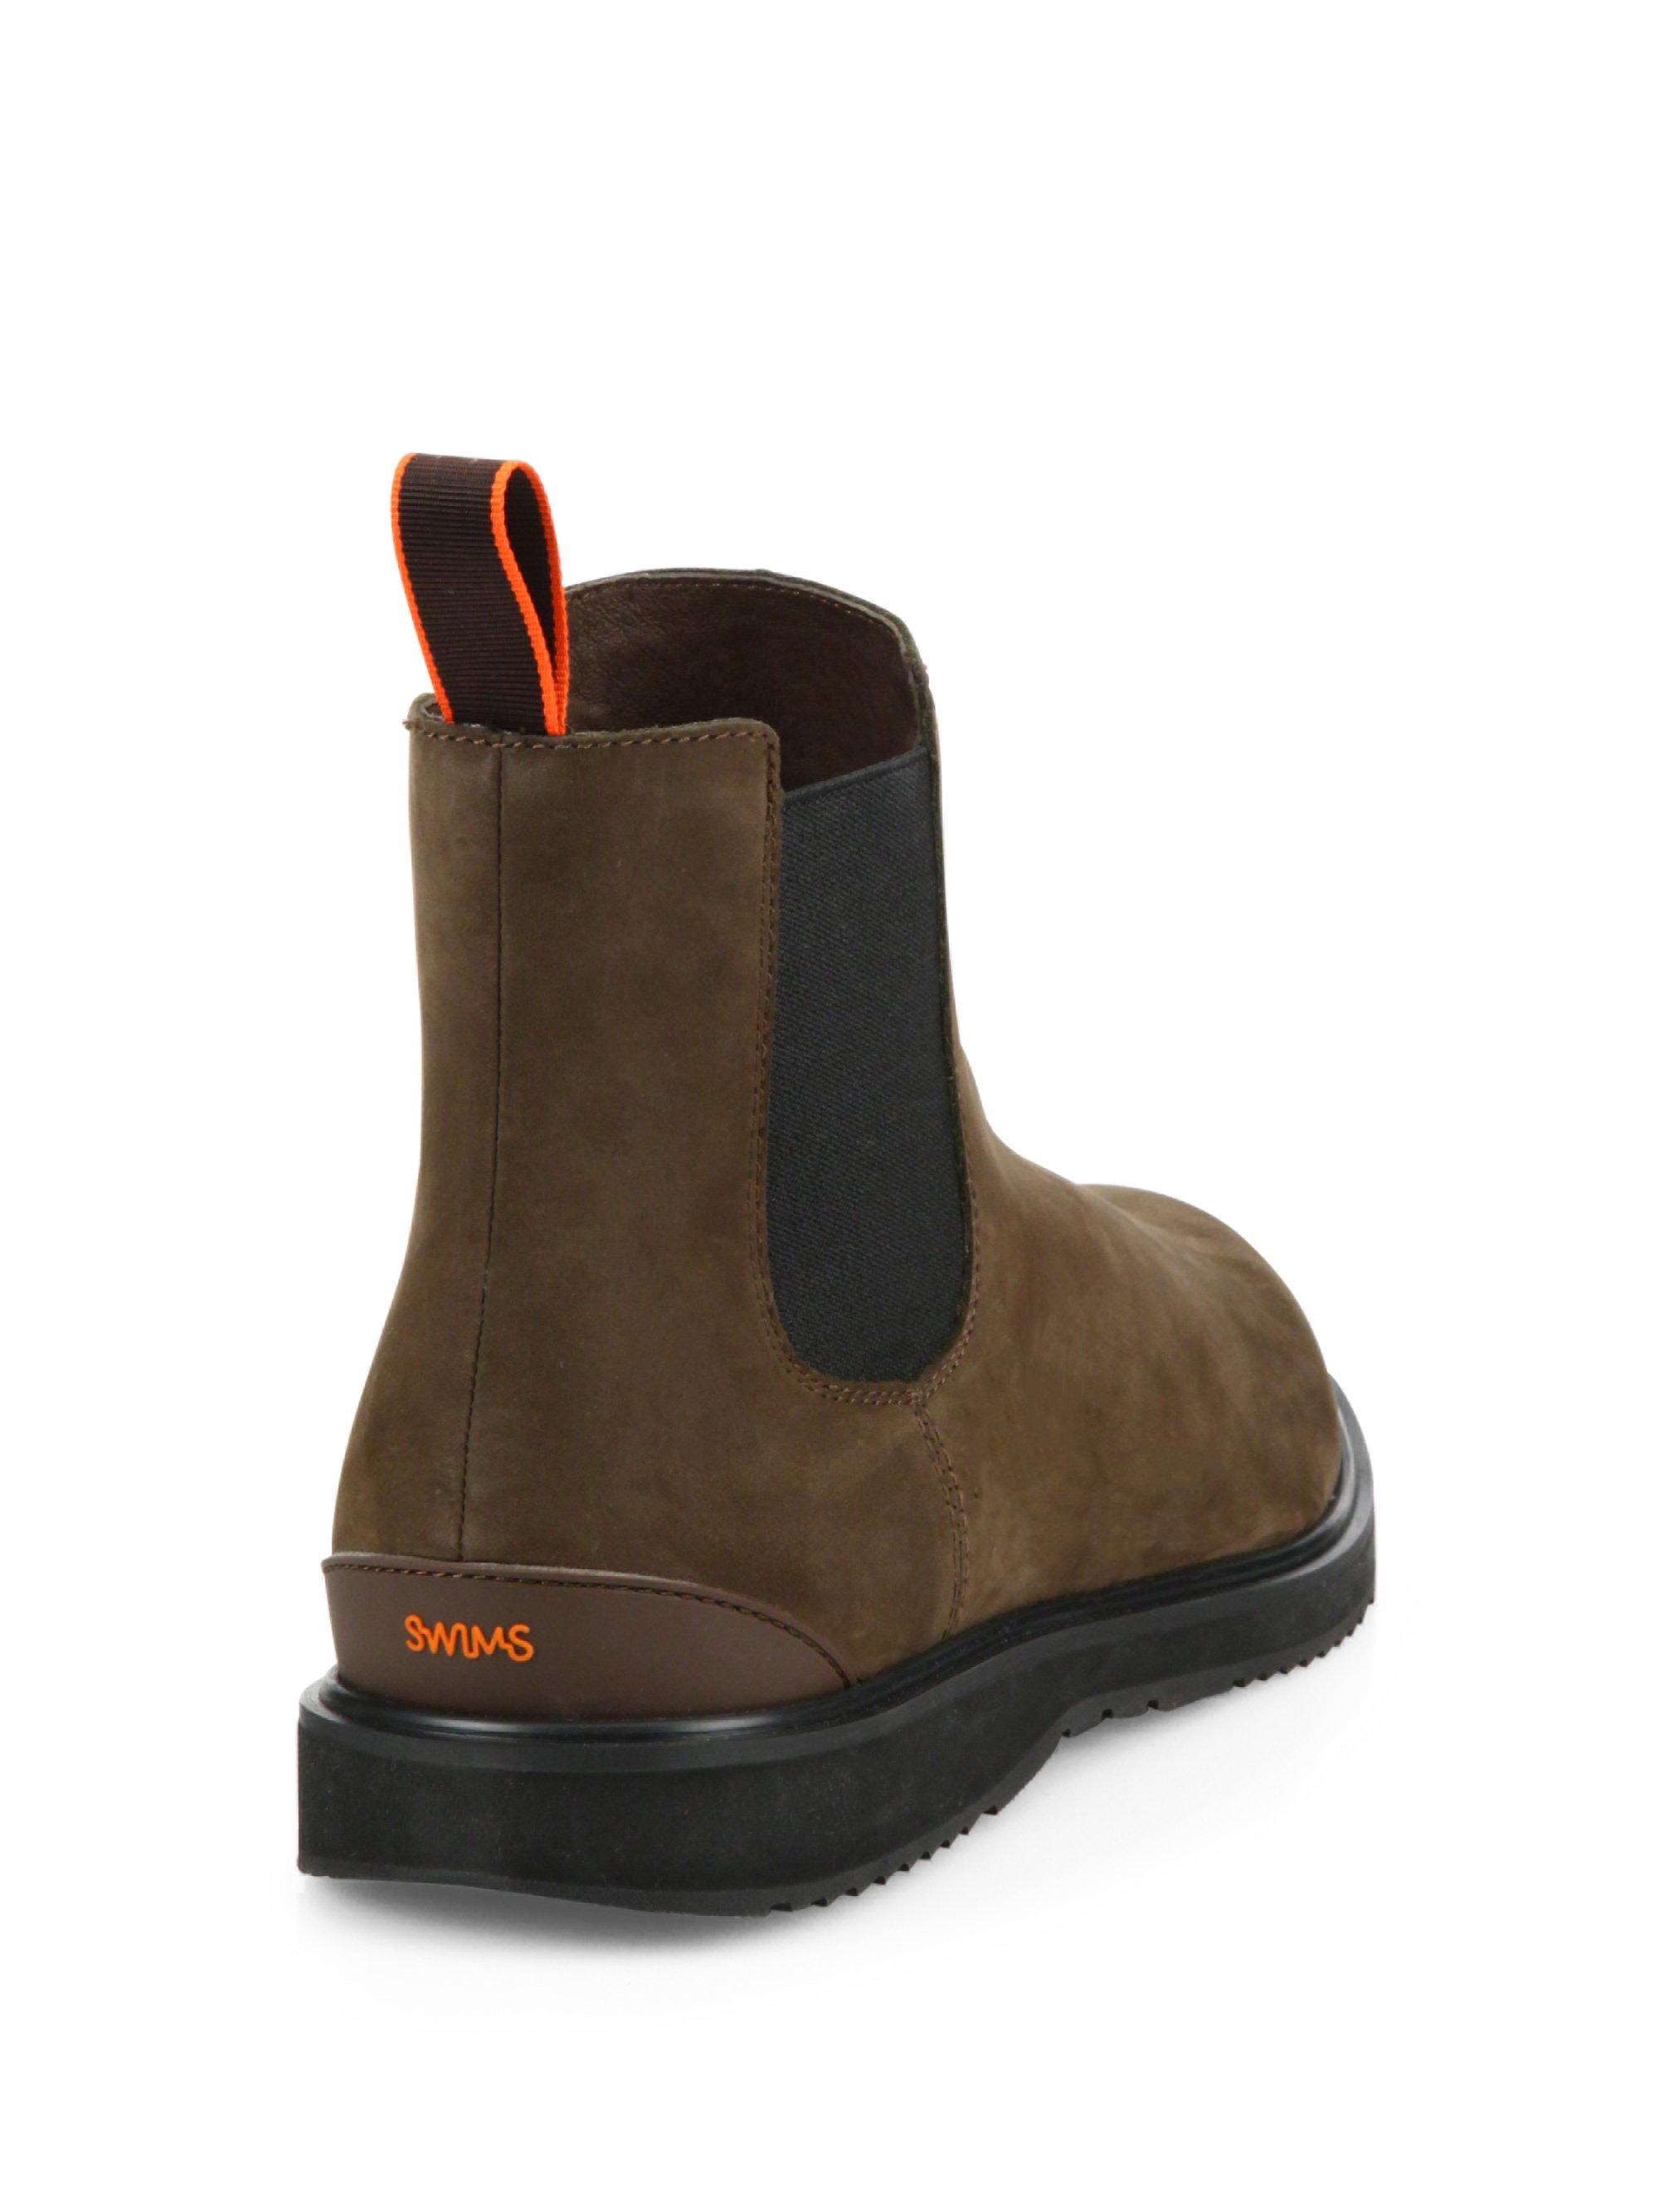 Lyst - Swims Barry Classic Chelsea Boots in Brown for Men